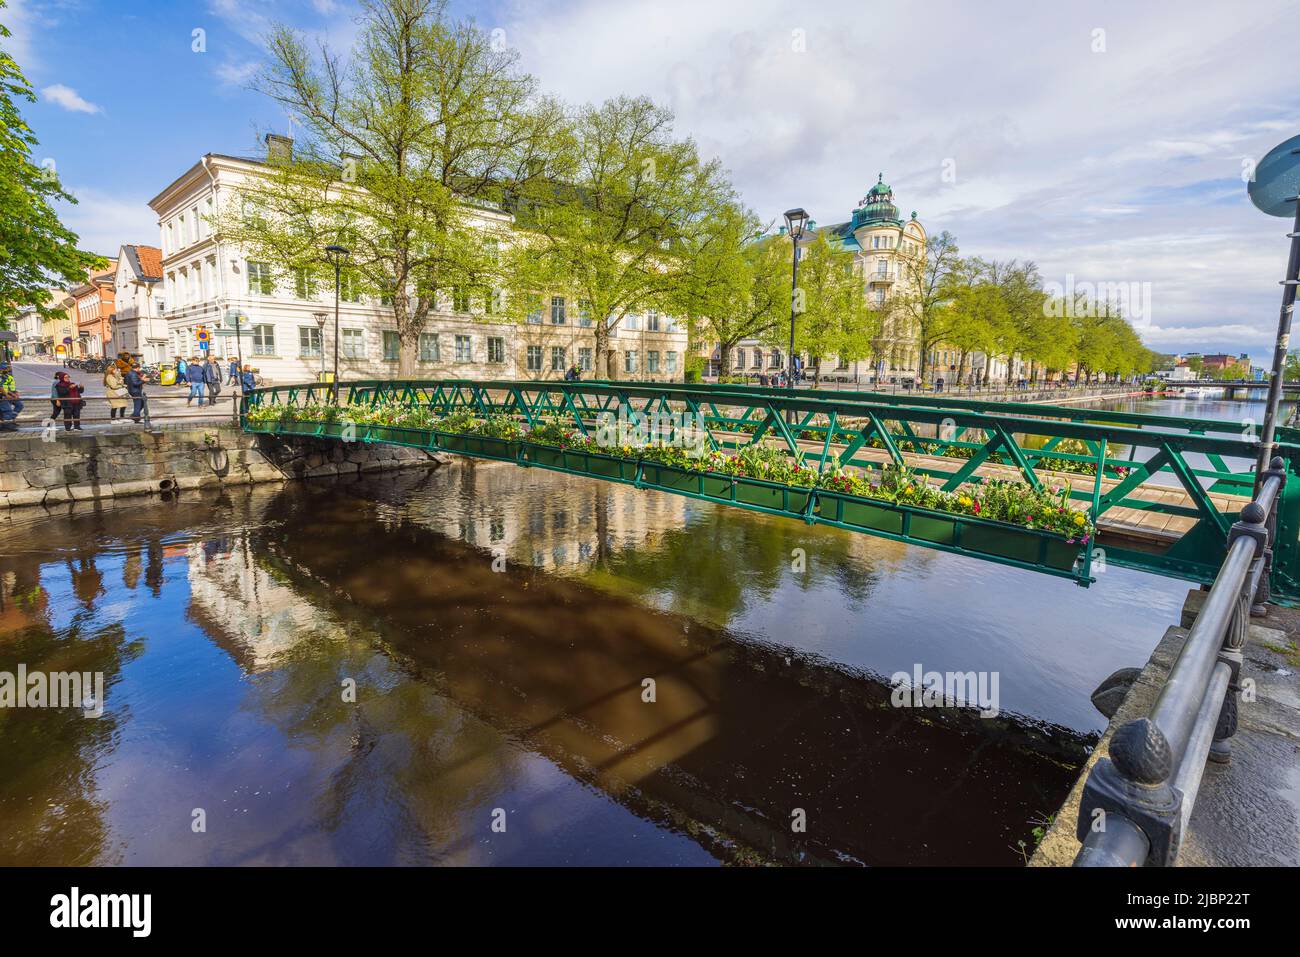 Lovely calming cityscape view. Cute bridge over small river decorated with flowers. Sweden. Uppsala. Stock Photo